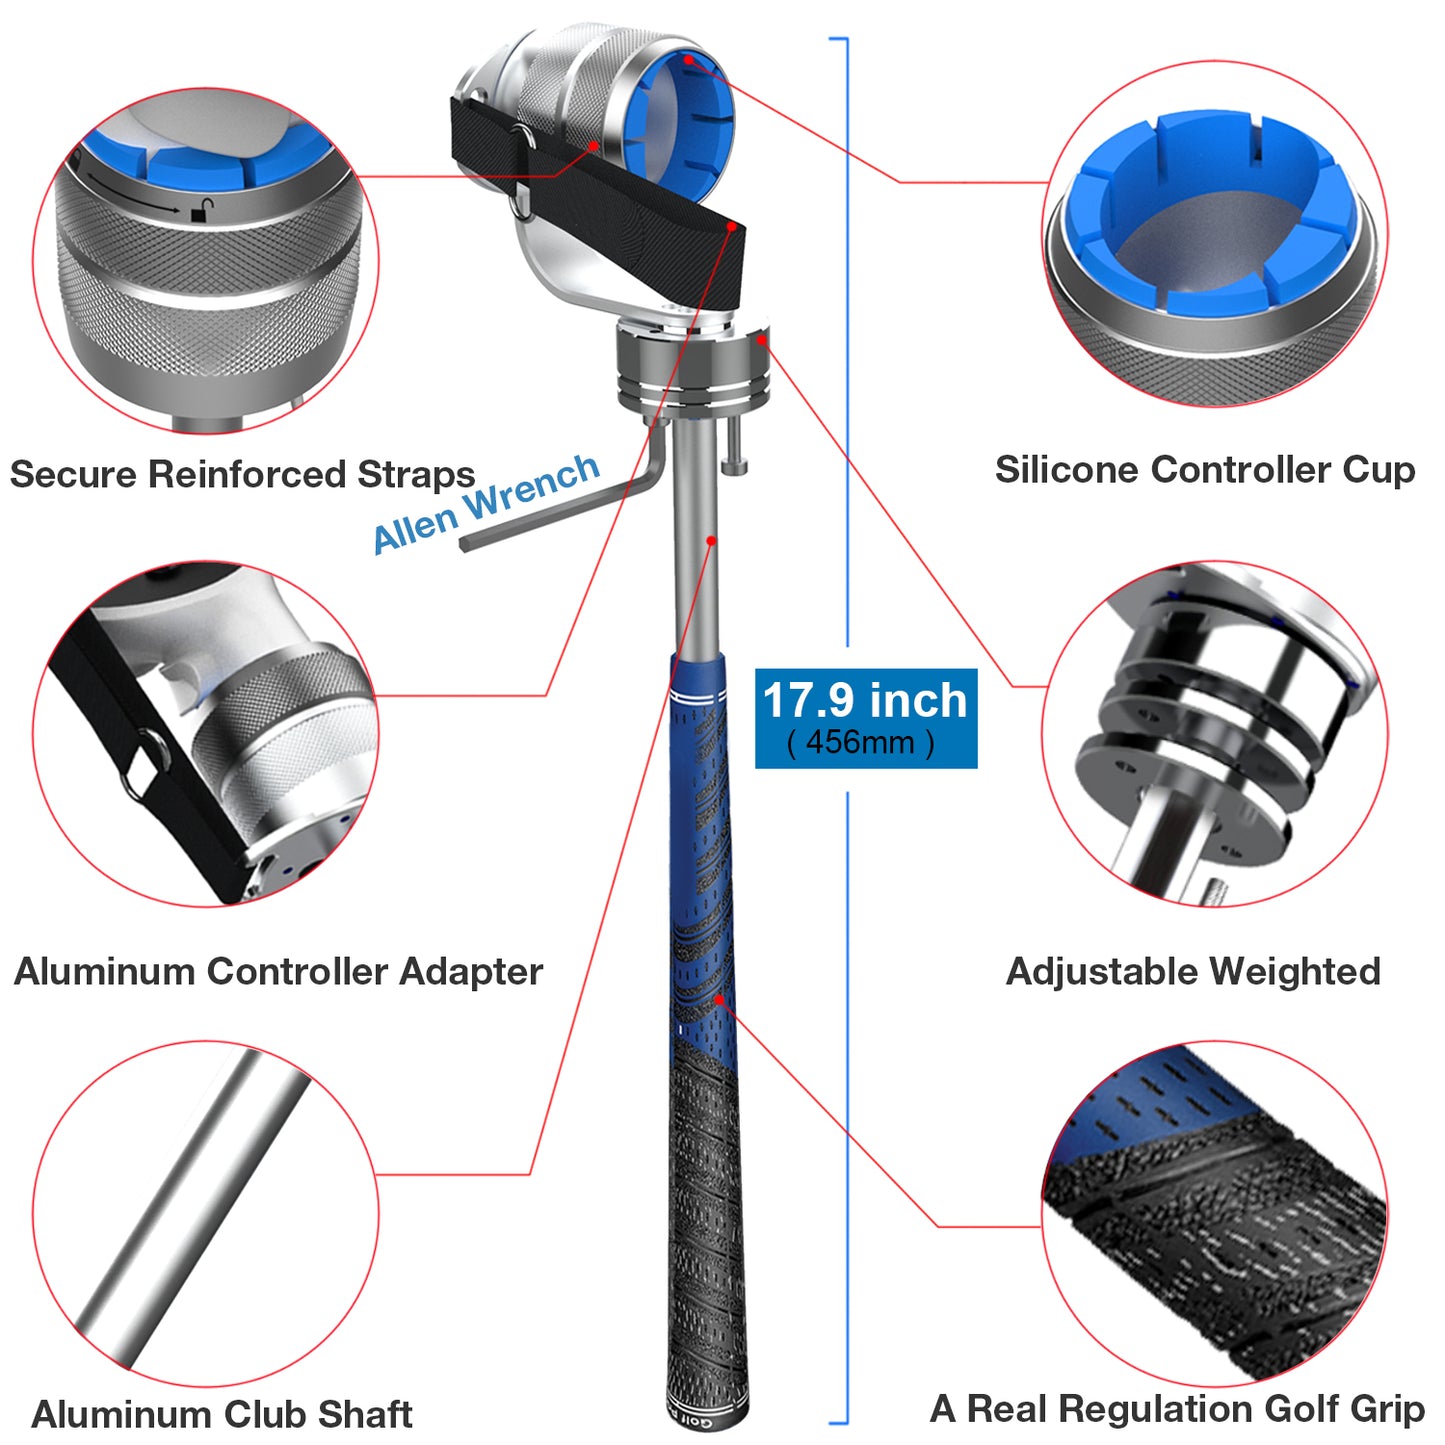 Weighted Golf Club Attachment for Meta Quest 3 | All new 90 DEGREE VERSION